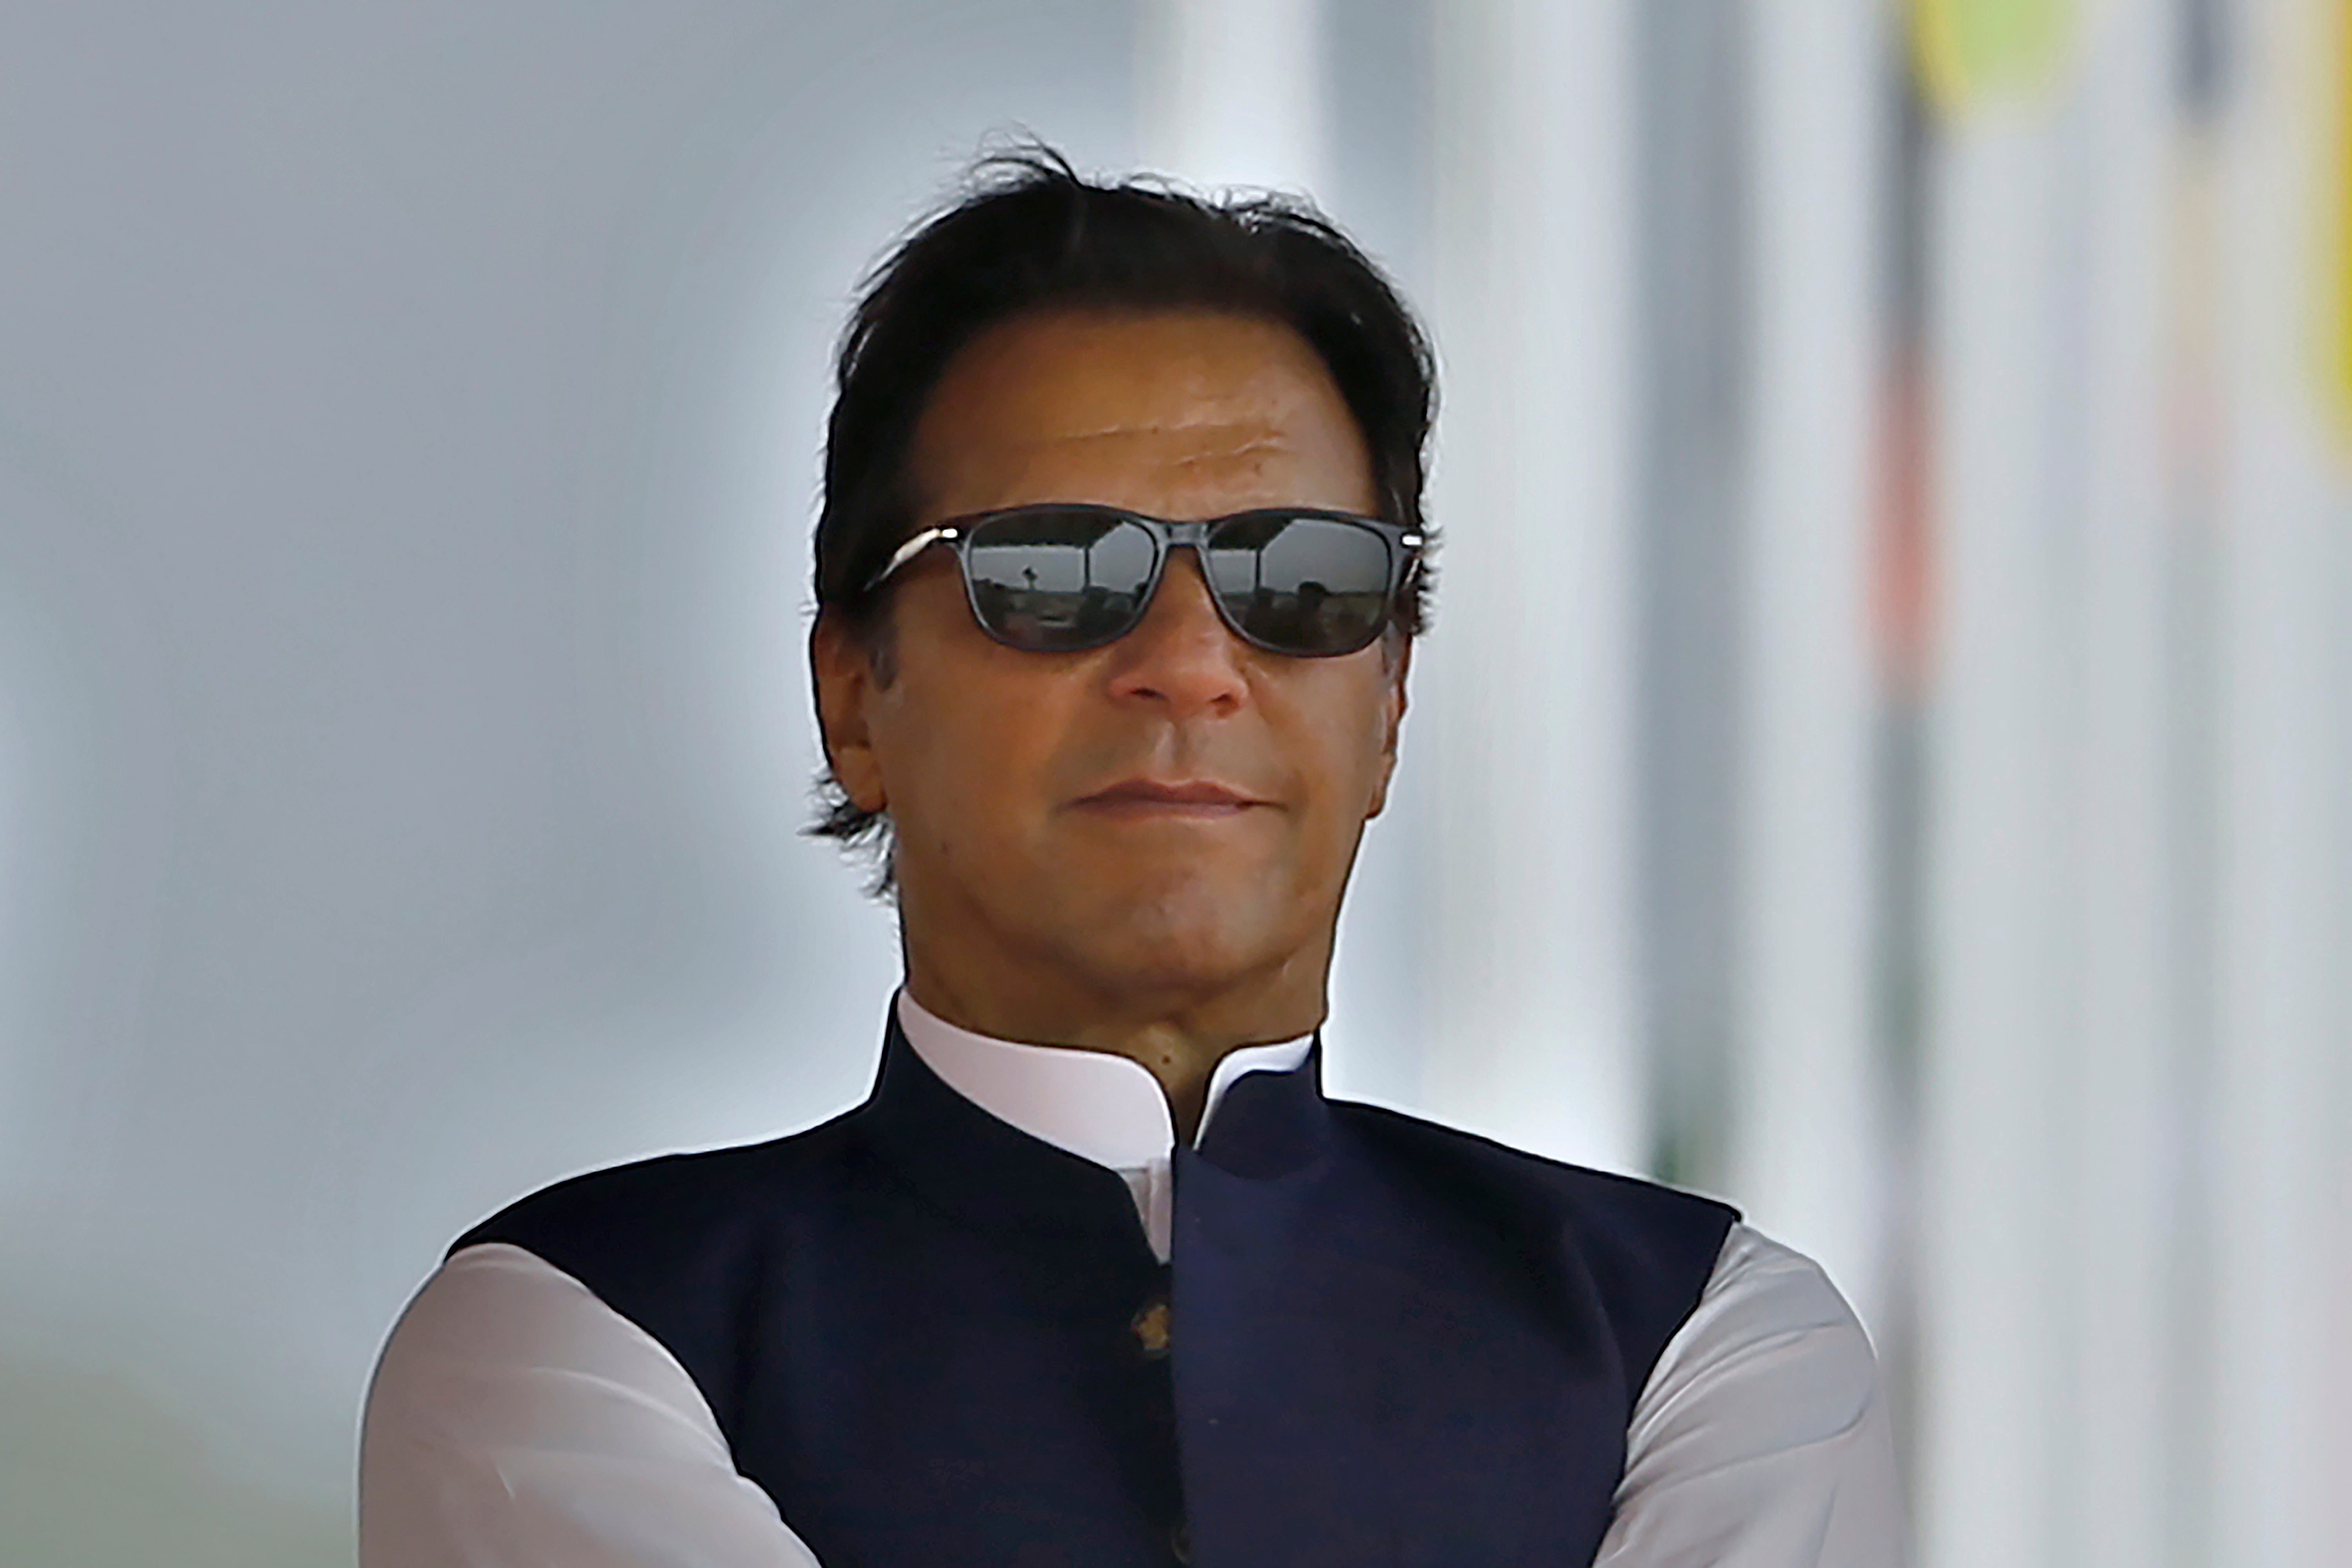 File photo: Imran Khan would become the first Pakistani PM to be ousted by a no-confidence vote if the motion is tabled and the majority votes against him